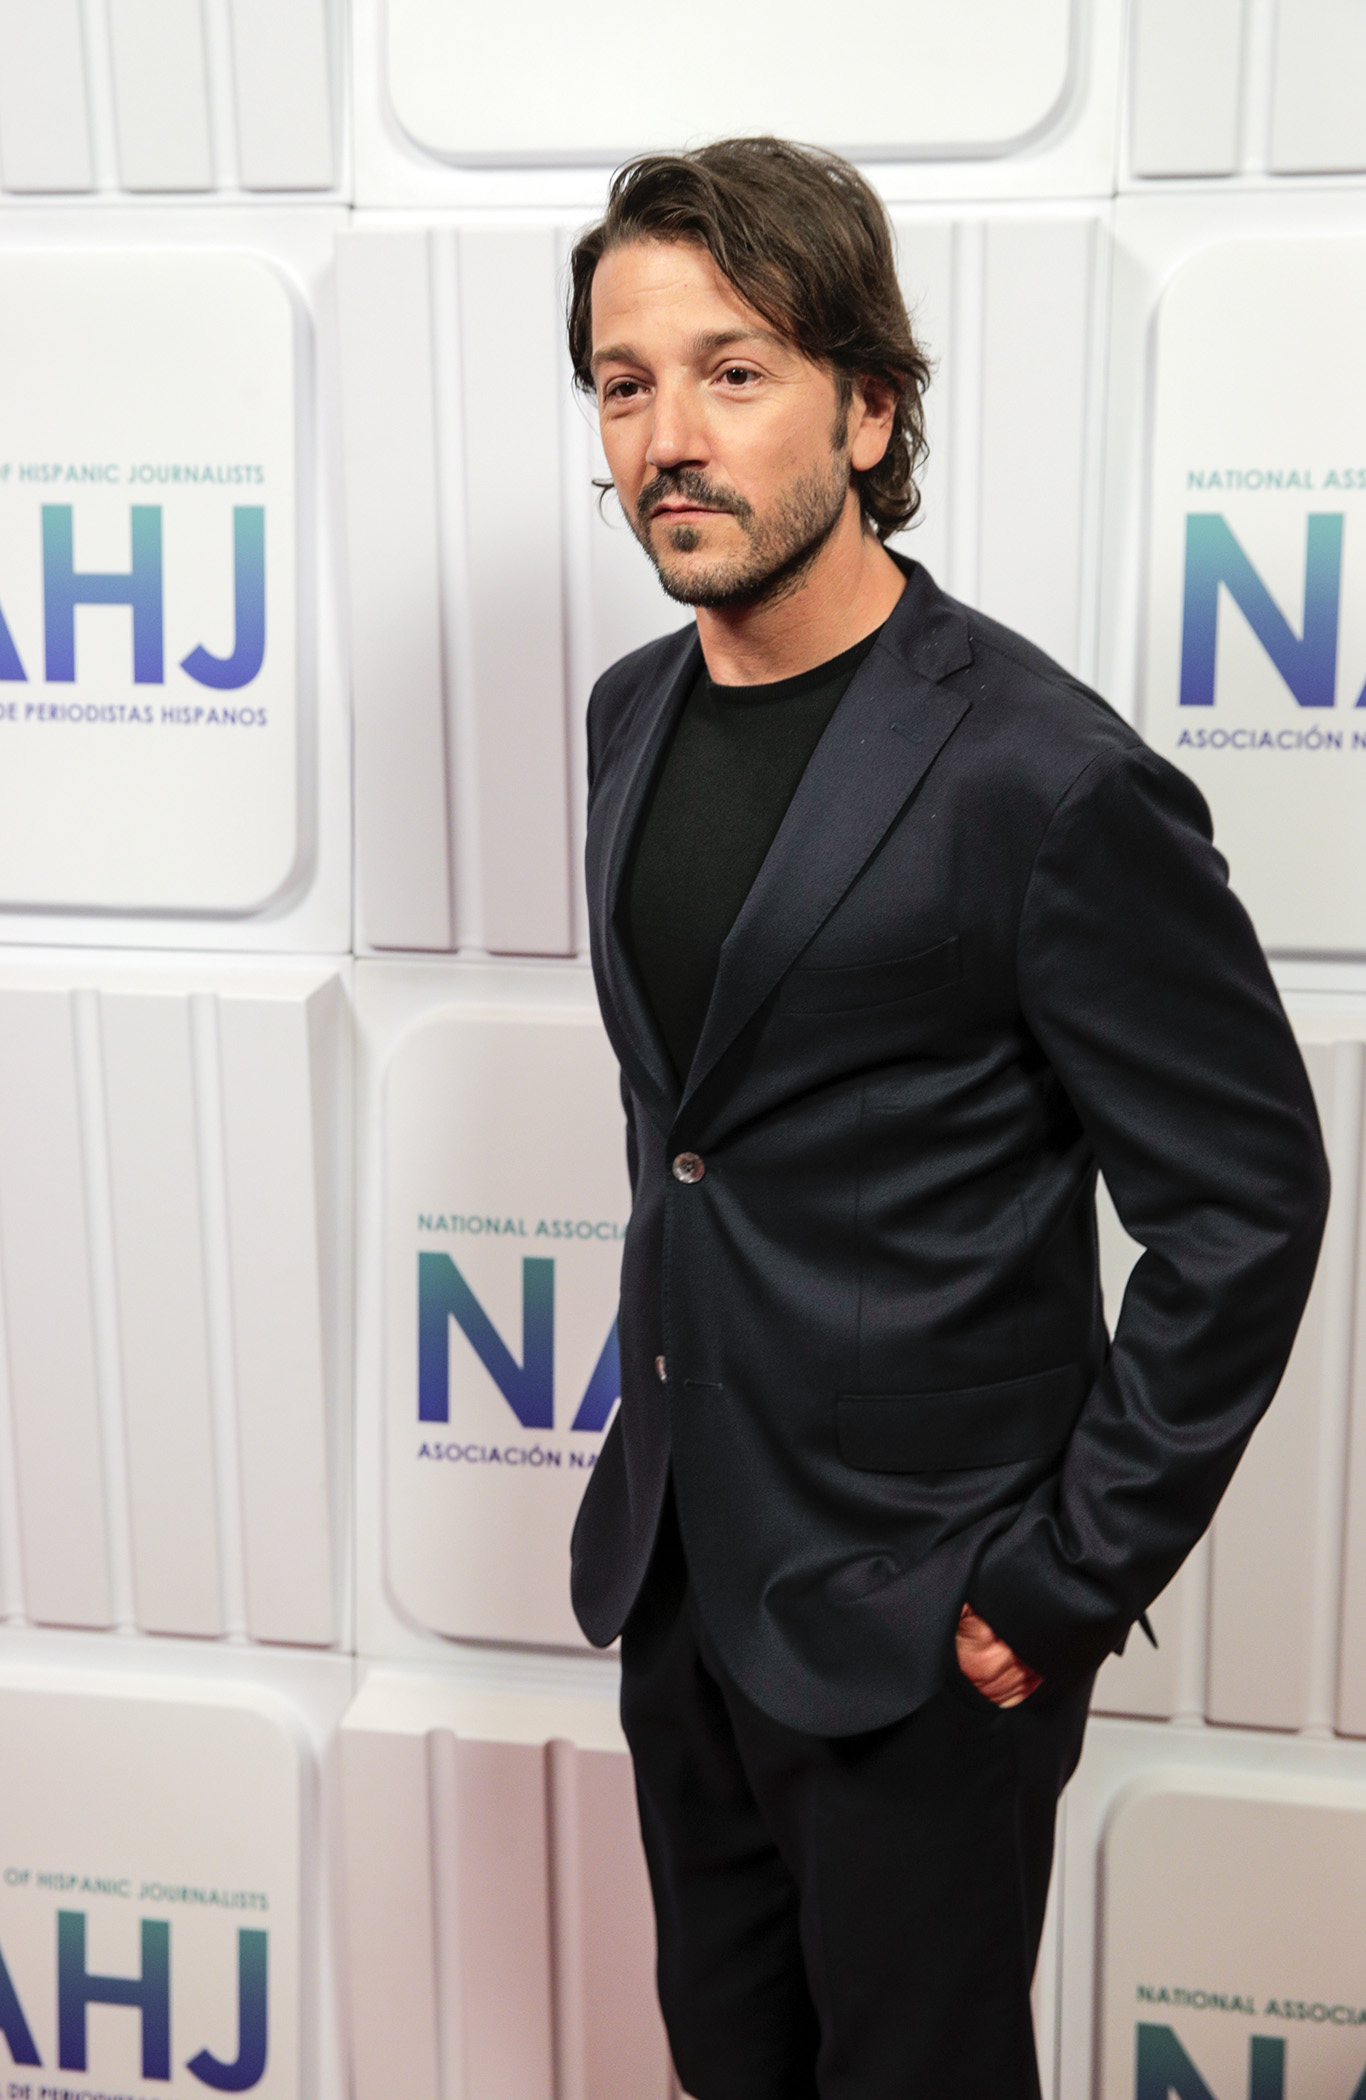 Actor Diego Luna poses for a photo on the National Association of Hispanic Journalists Hall of Fame Gala red carpet in Las Vegas, Nev., on Saturday, August 5, 2022.